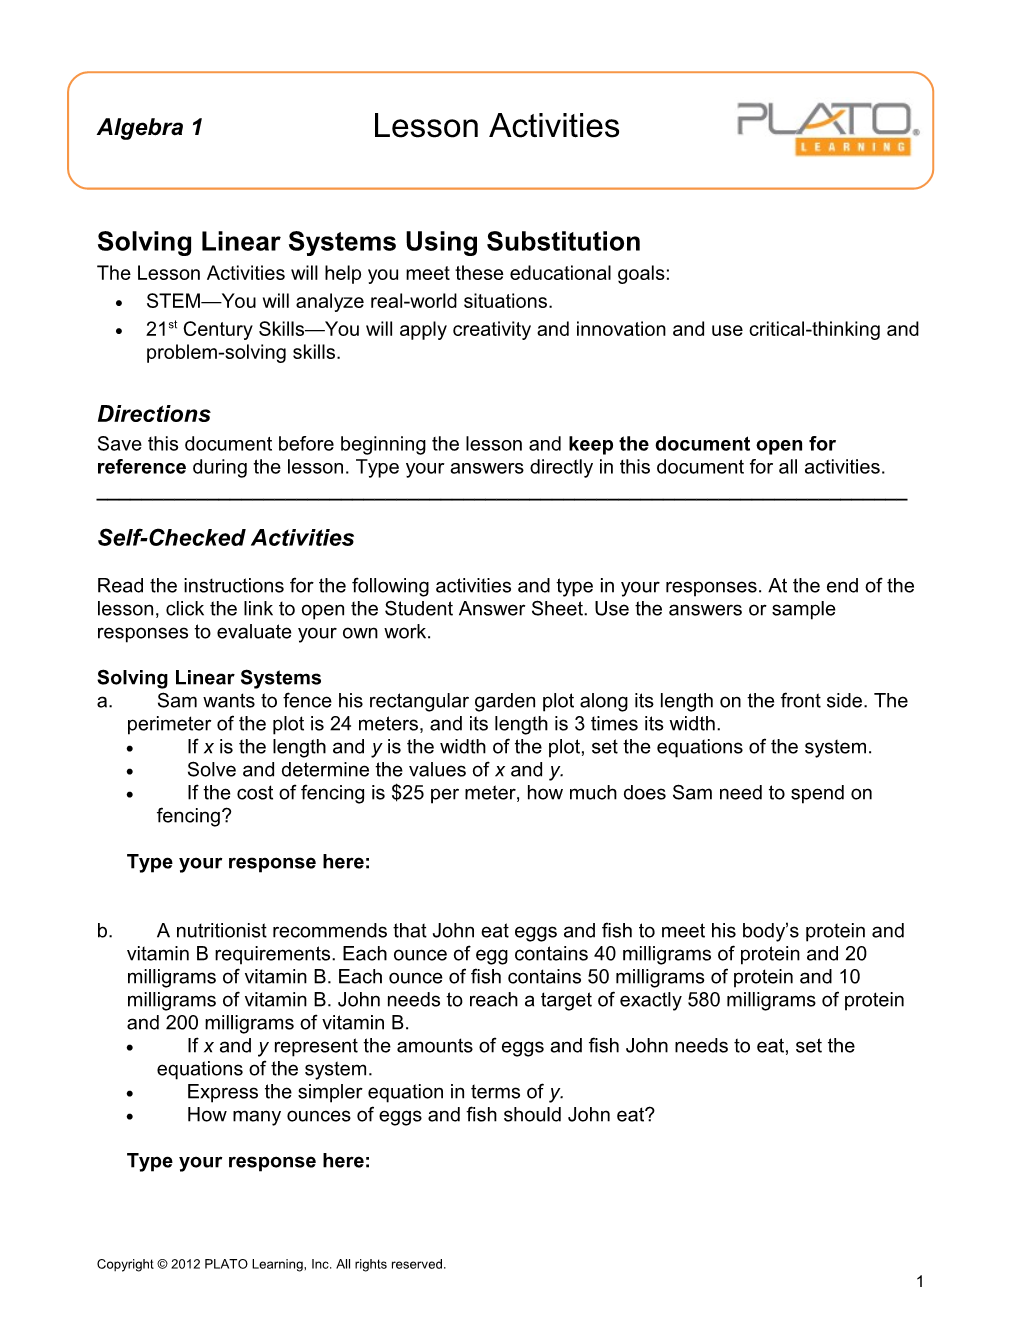 Solving Linear Systems Using Substitution